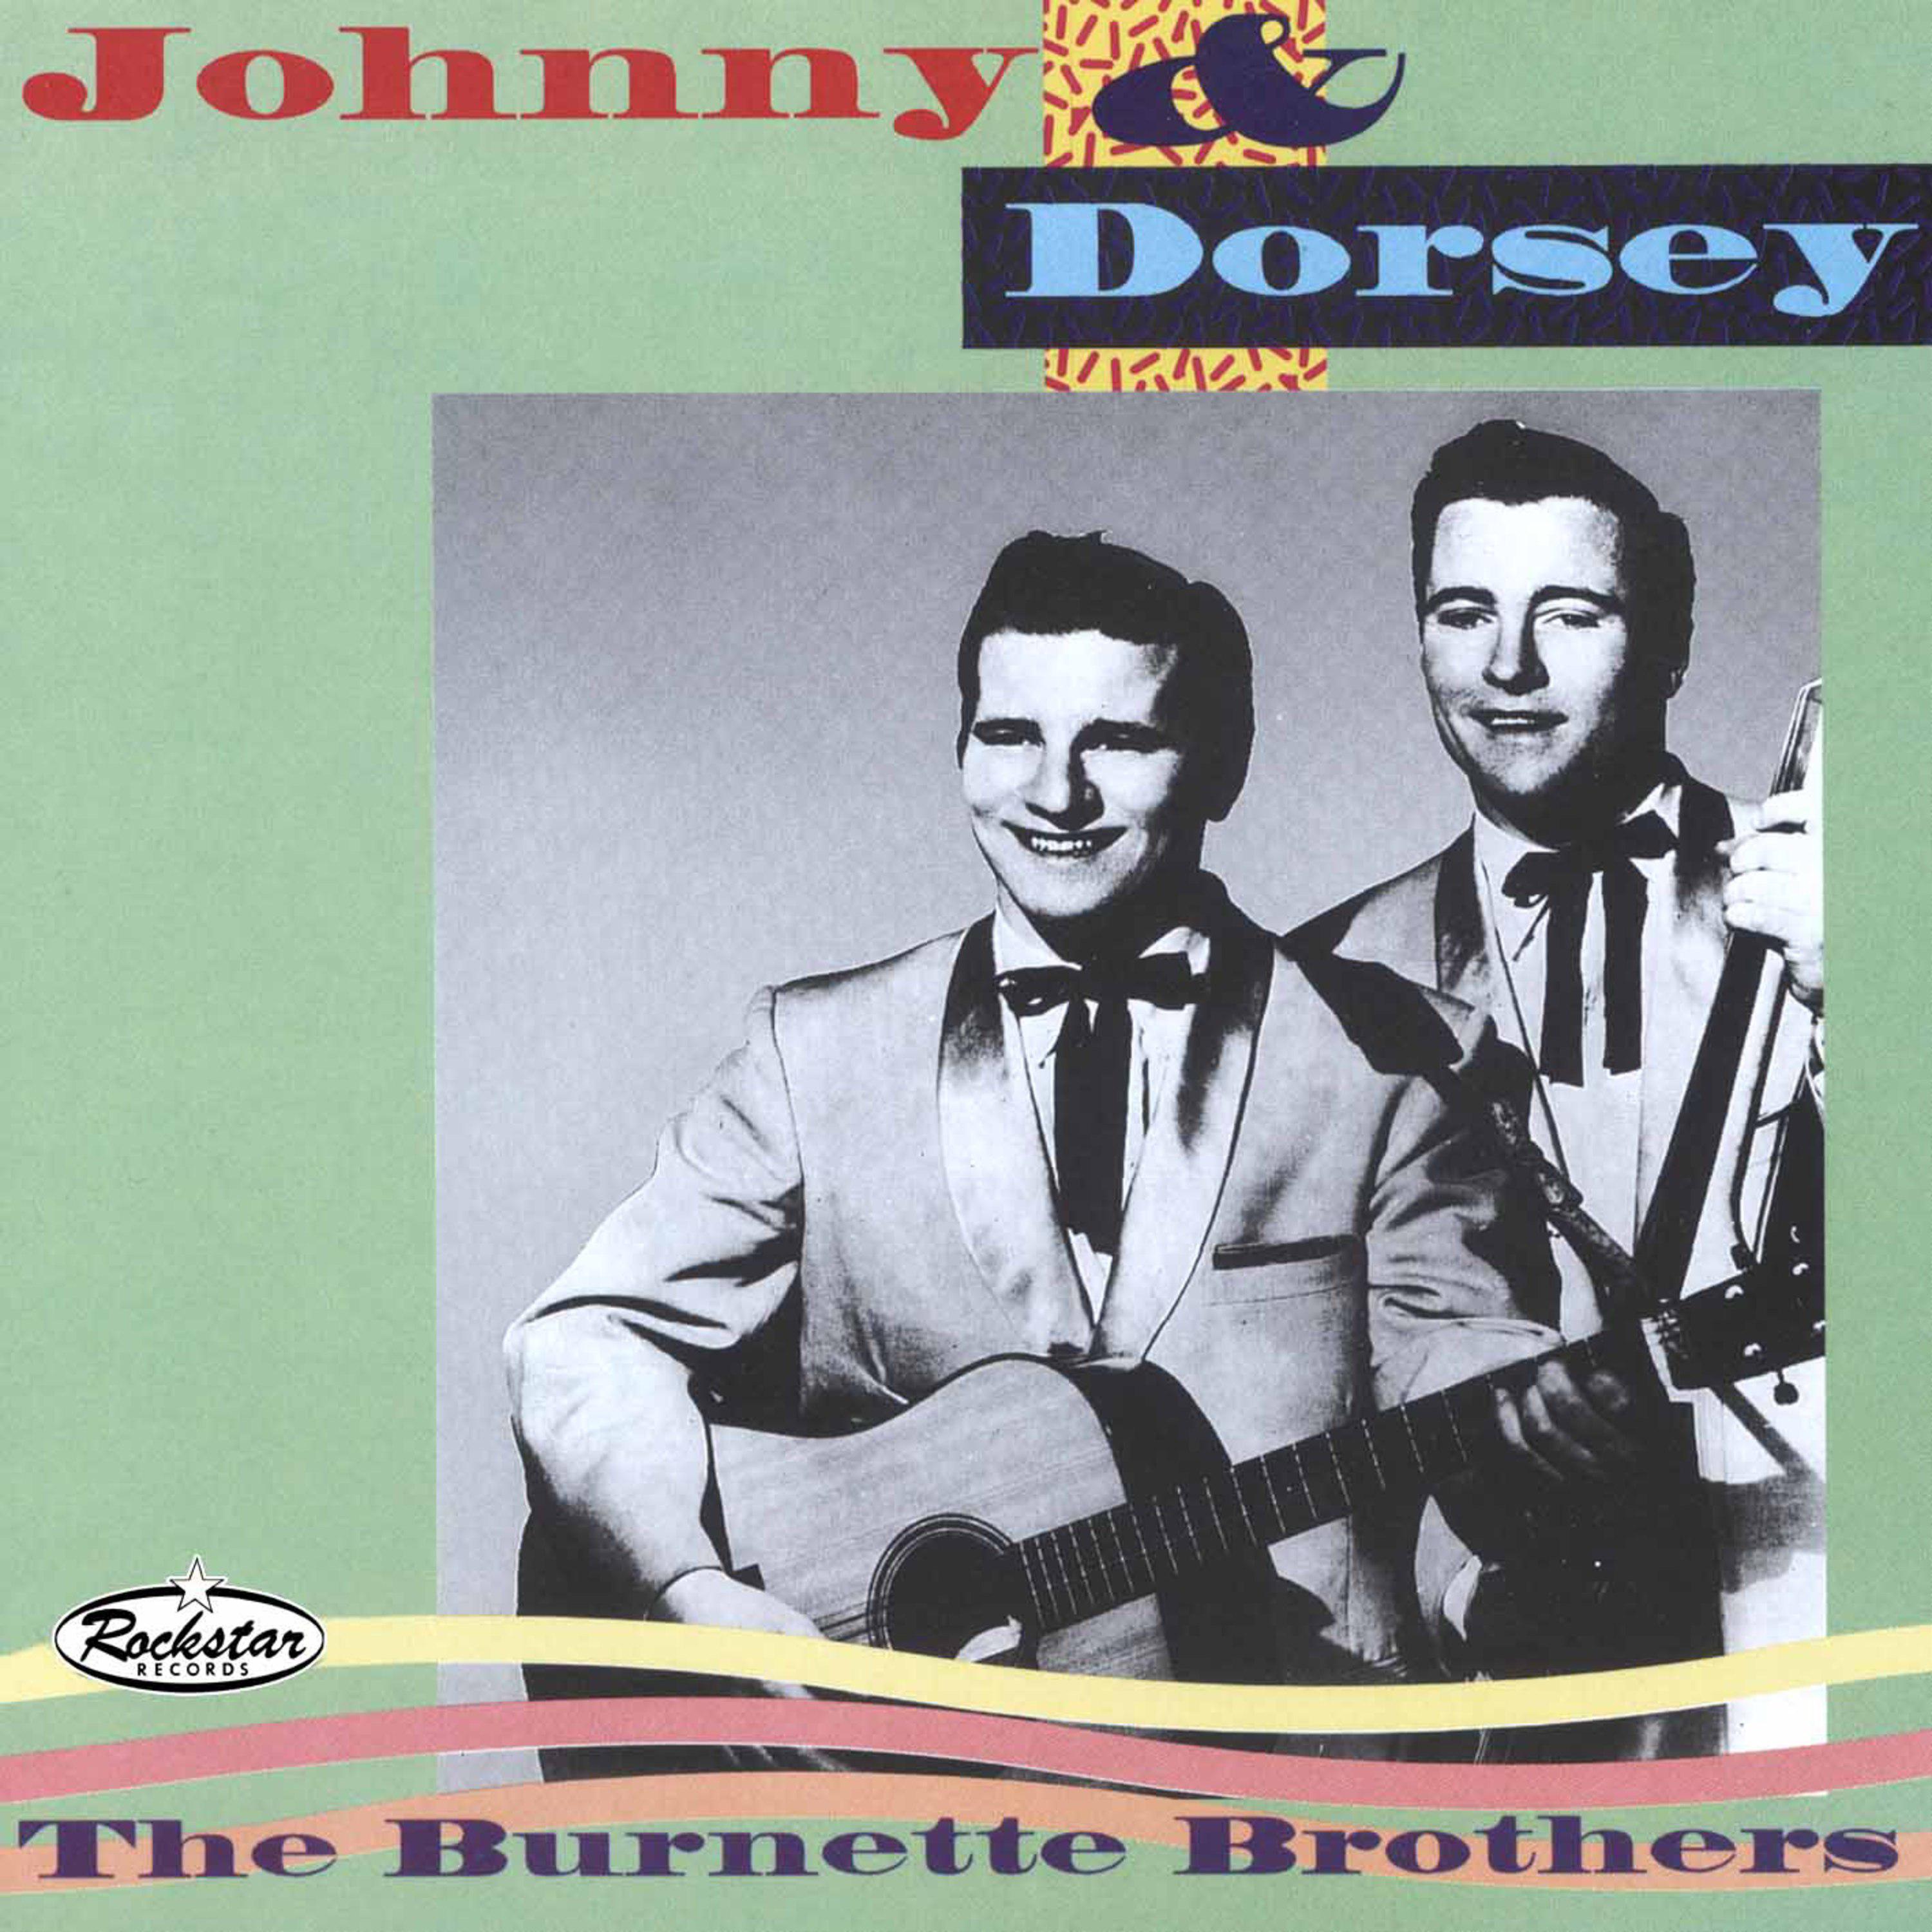 Interview with Johnny Burnette